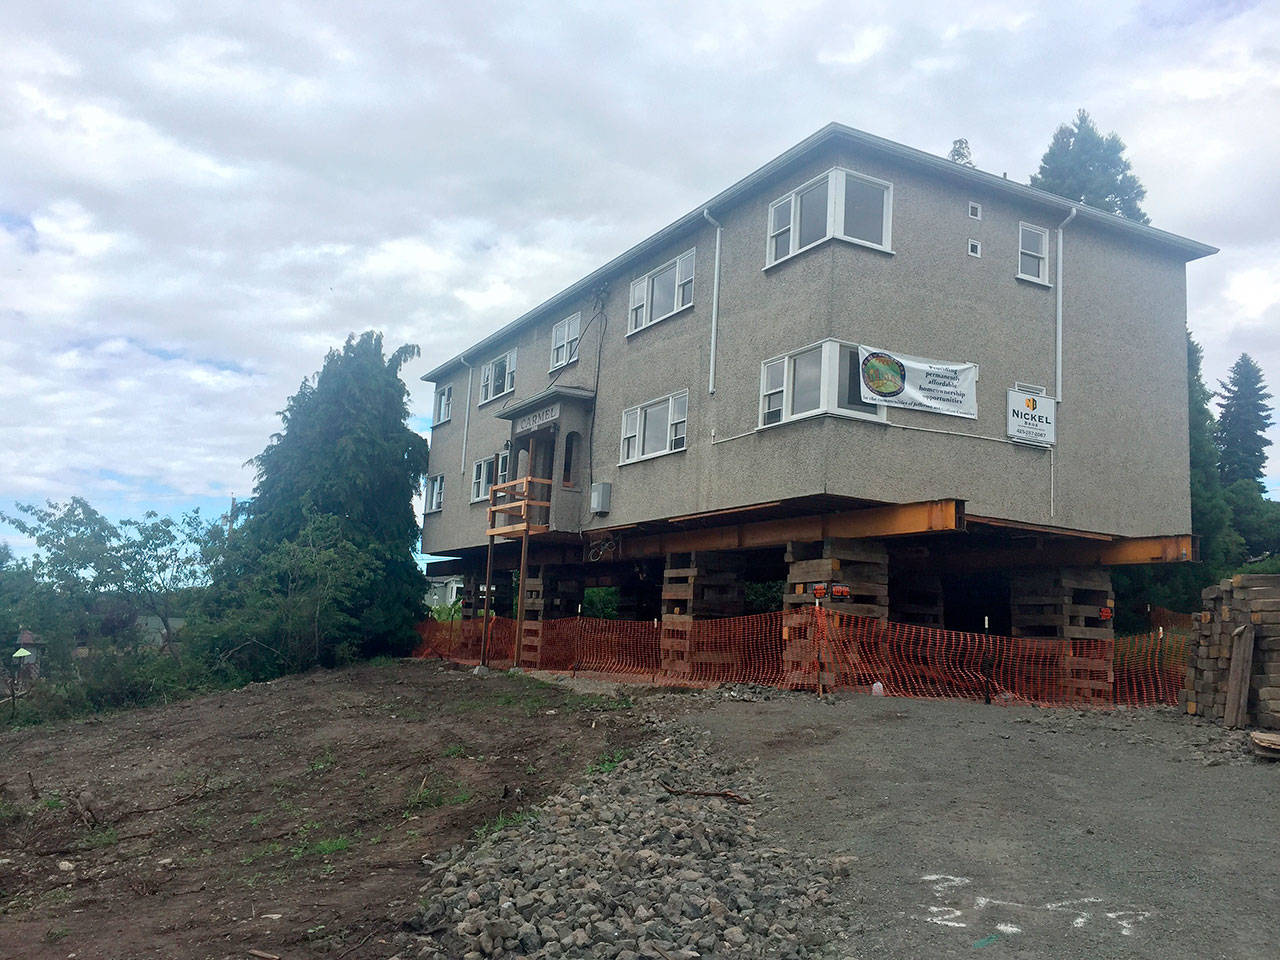 A two-story apartment complex was floated over from Victoria, B.C., to be used as affordable housing as part of a partnership between the City of Port Townsend and Homeward Bound, a land trust group. (Cydney McFarland/Peninsula Daily News)